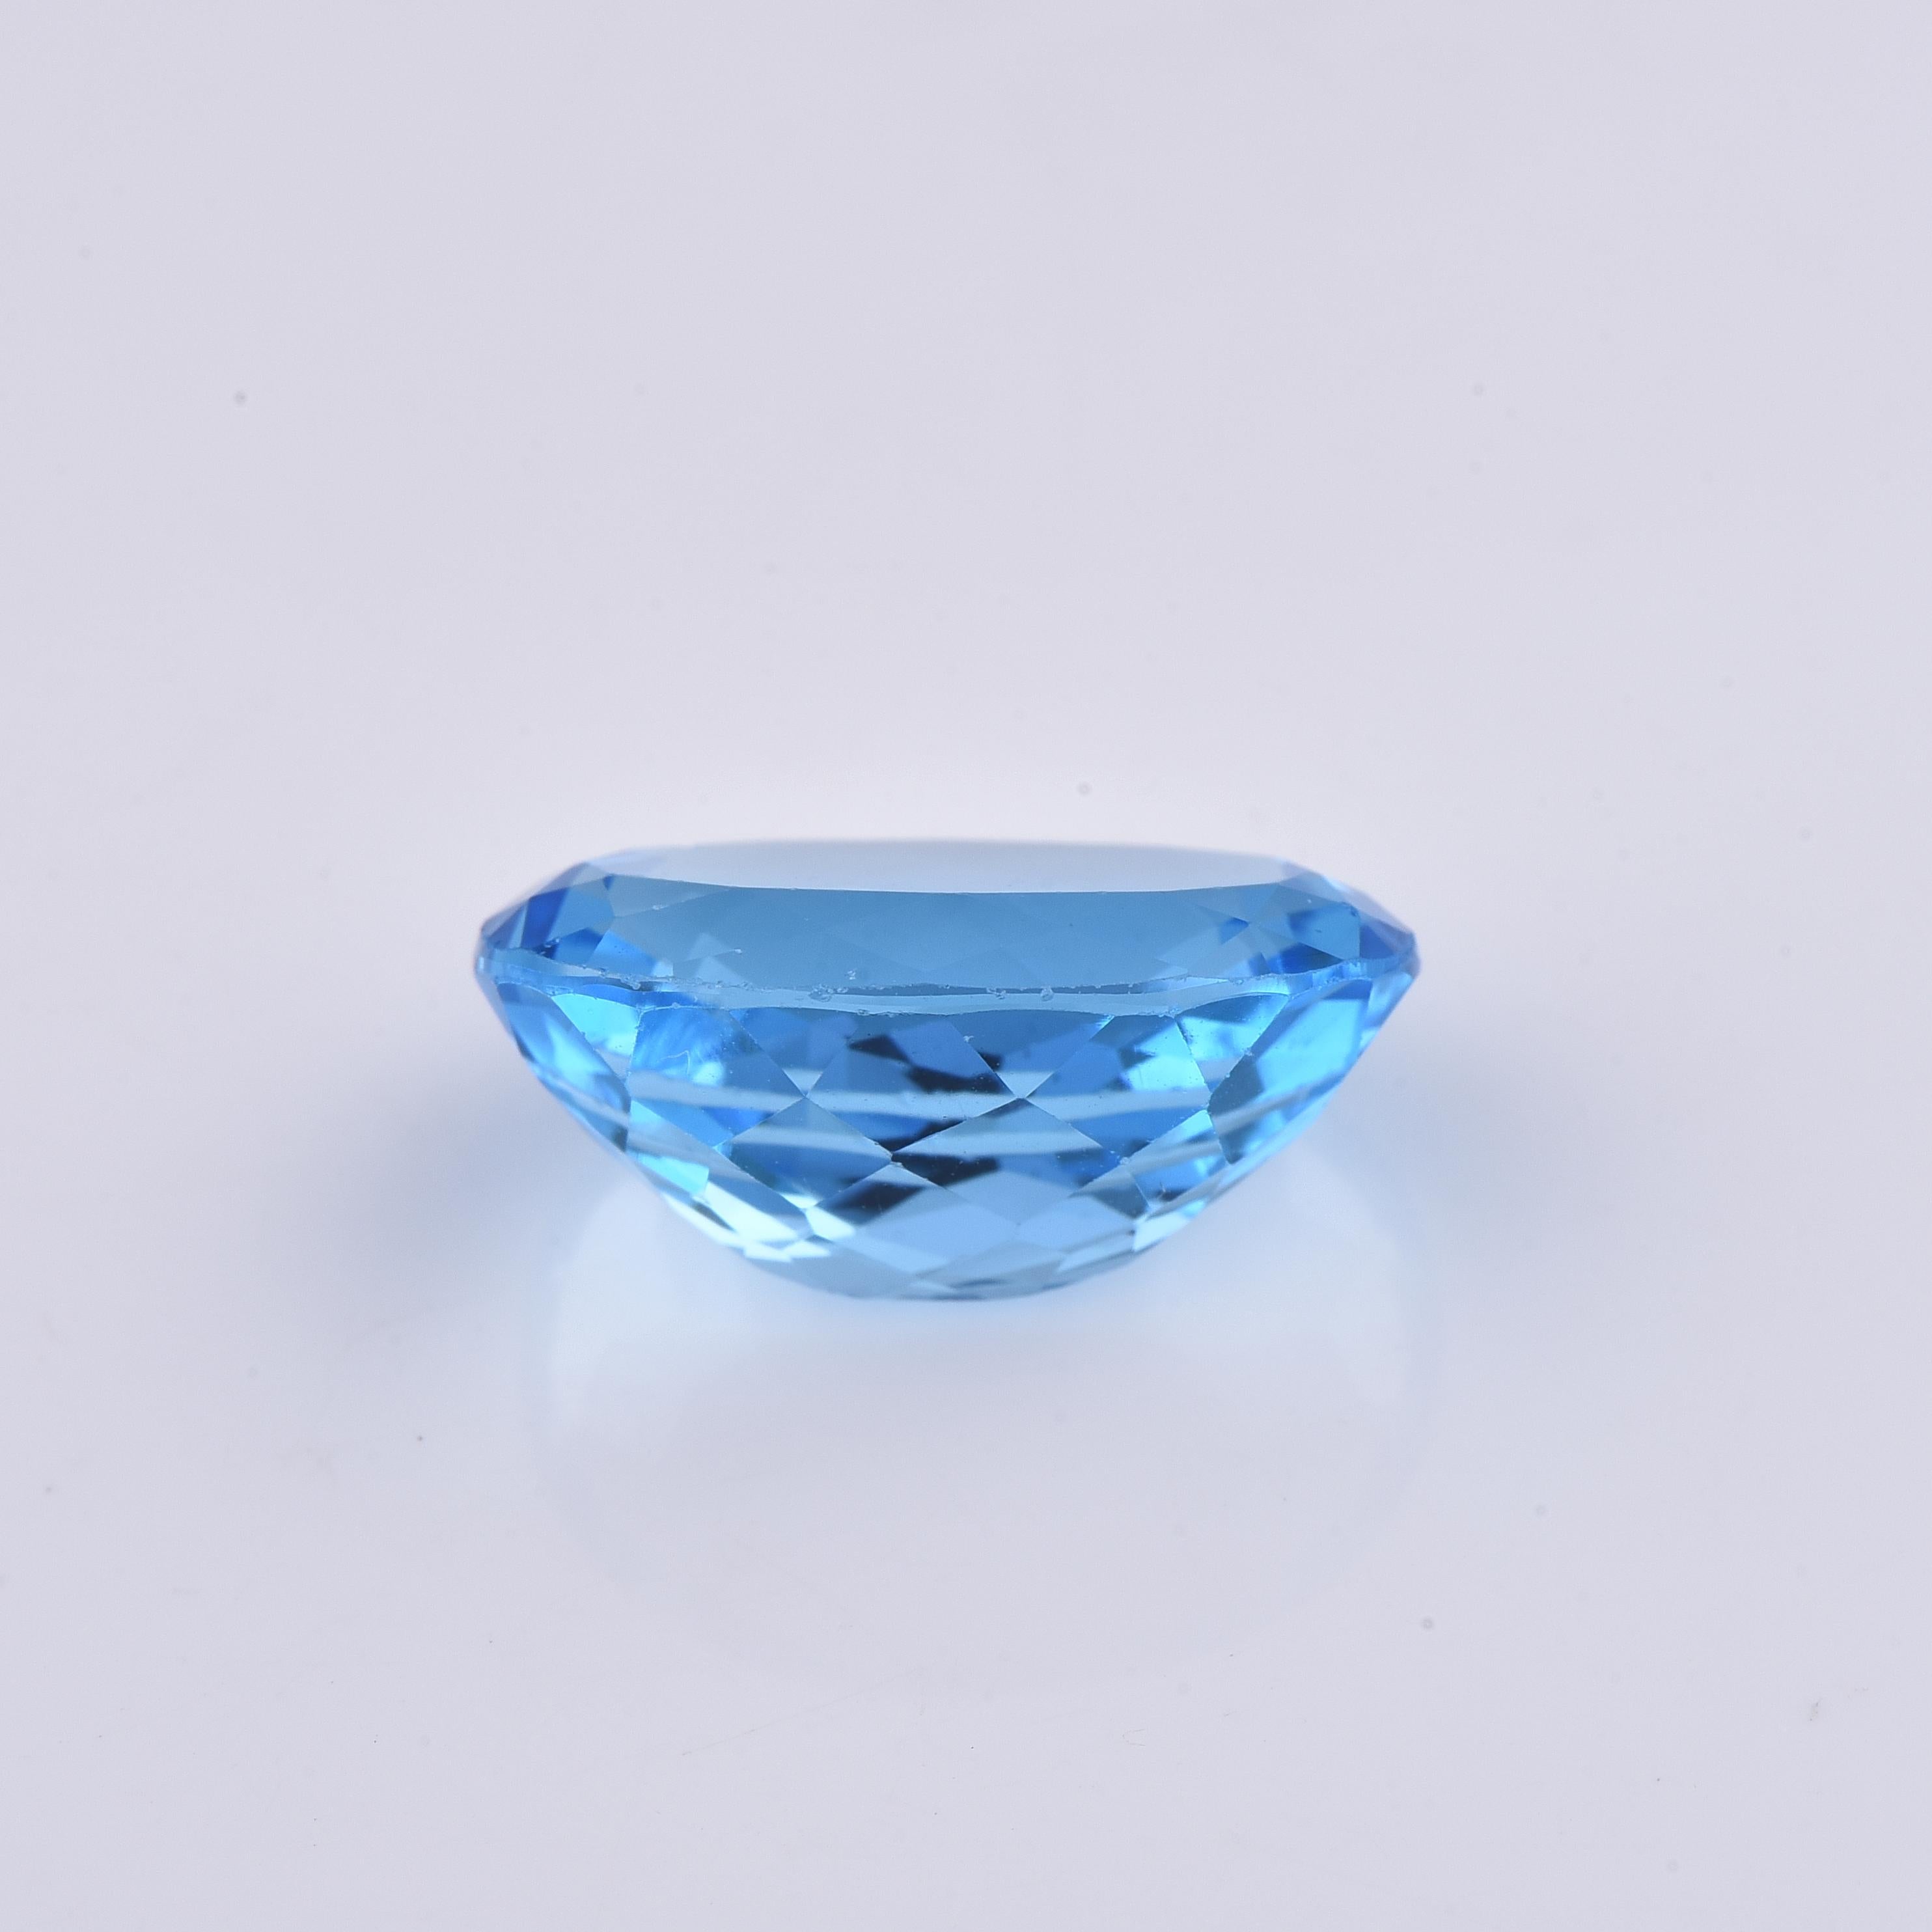 Stone Information: Natural Swiss Blue Topaz
Shape/Cut: Oval Shape
Color: Blue
Dimensions (mm): 16.00 x 12.00 x 7.44
Weight: 11.73ct